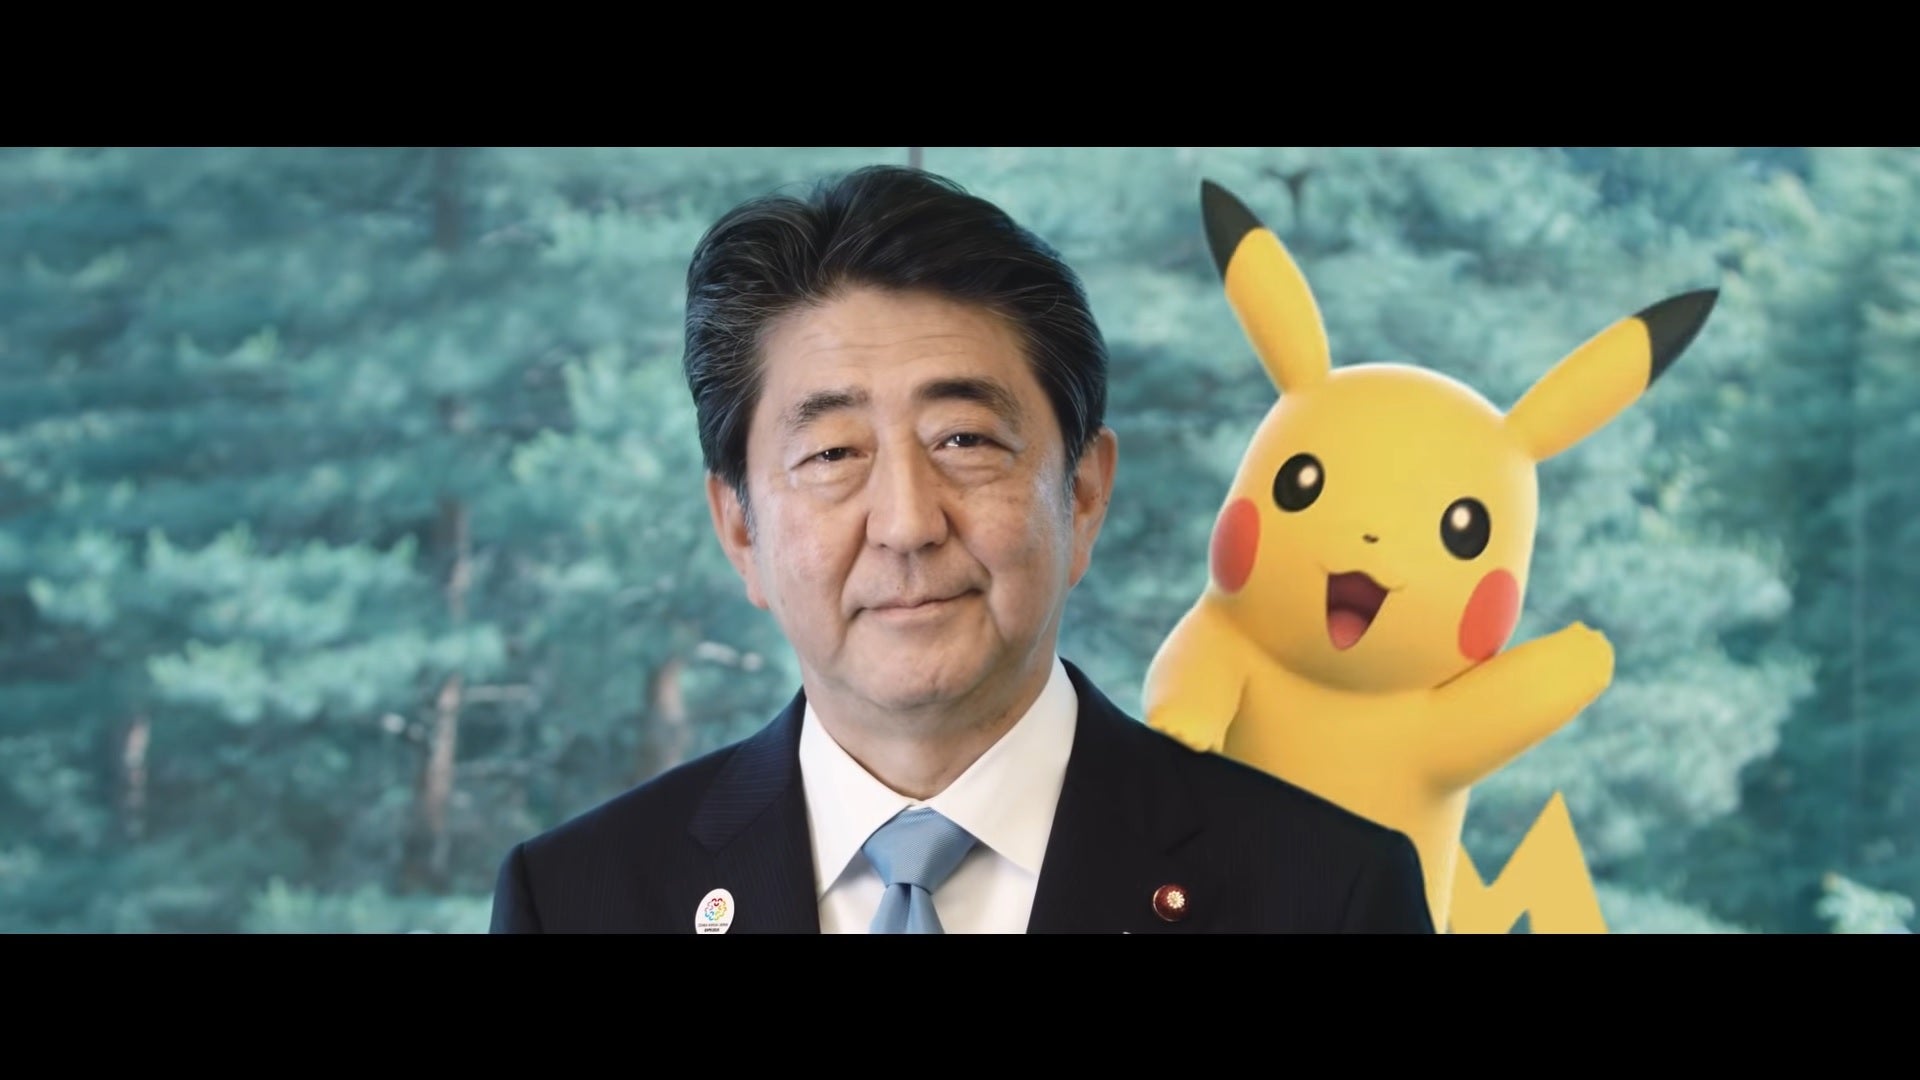 Image for Japan taps Pikachu for World Expo 2025 bid video